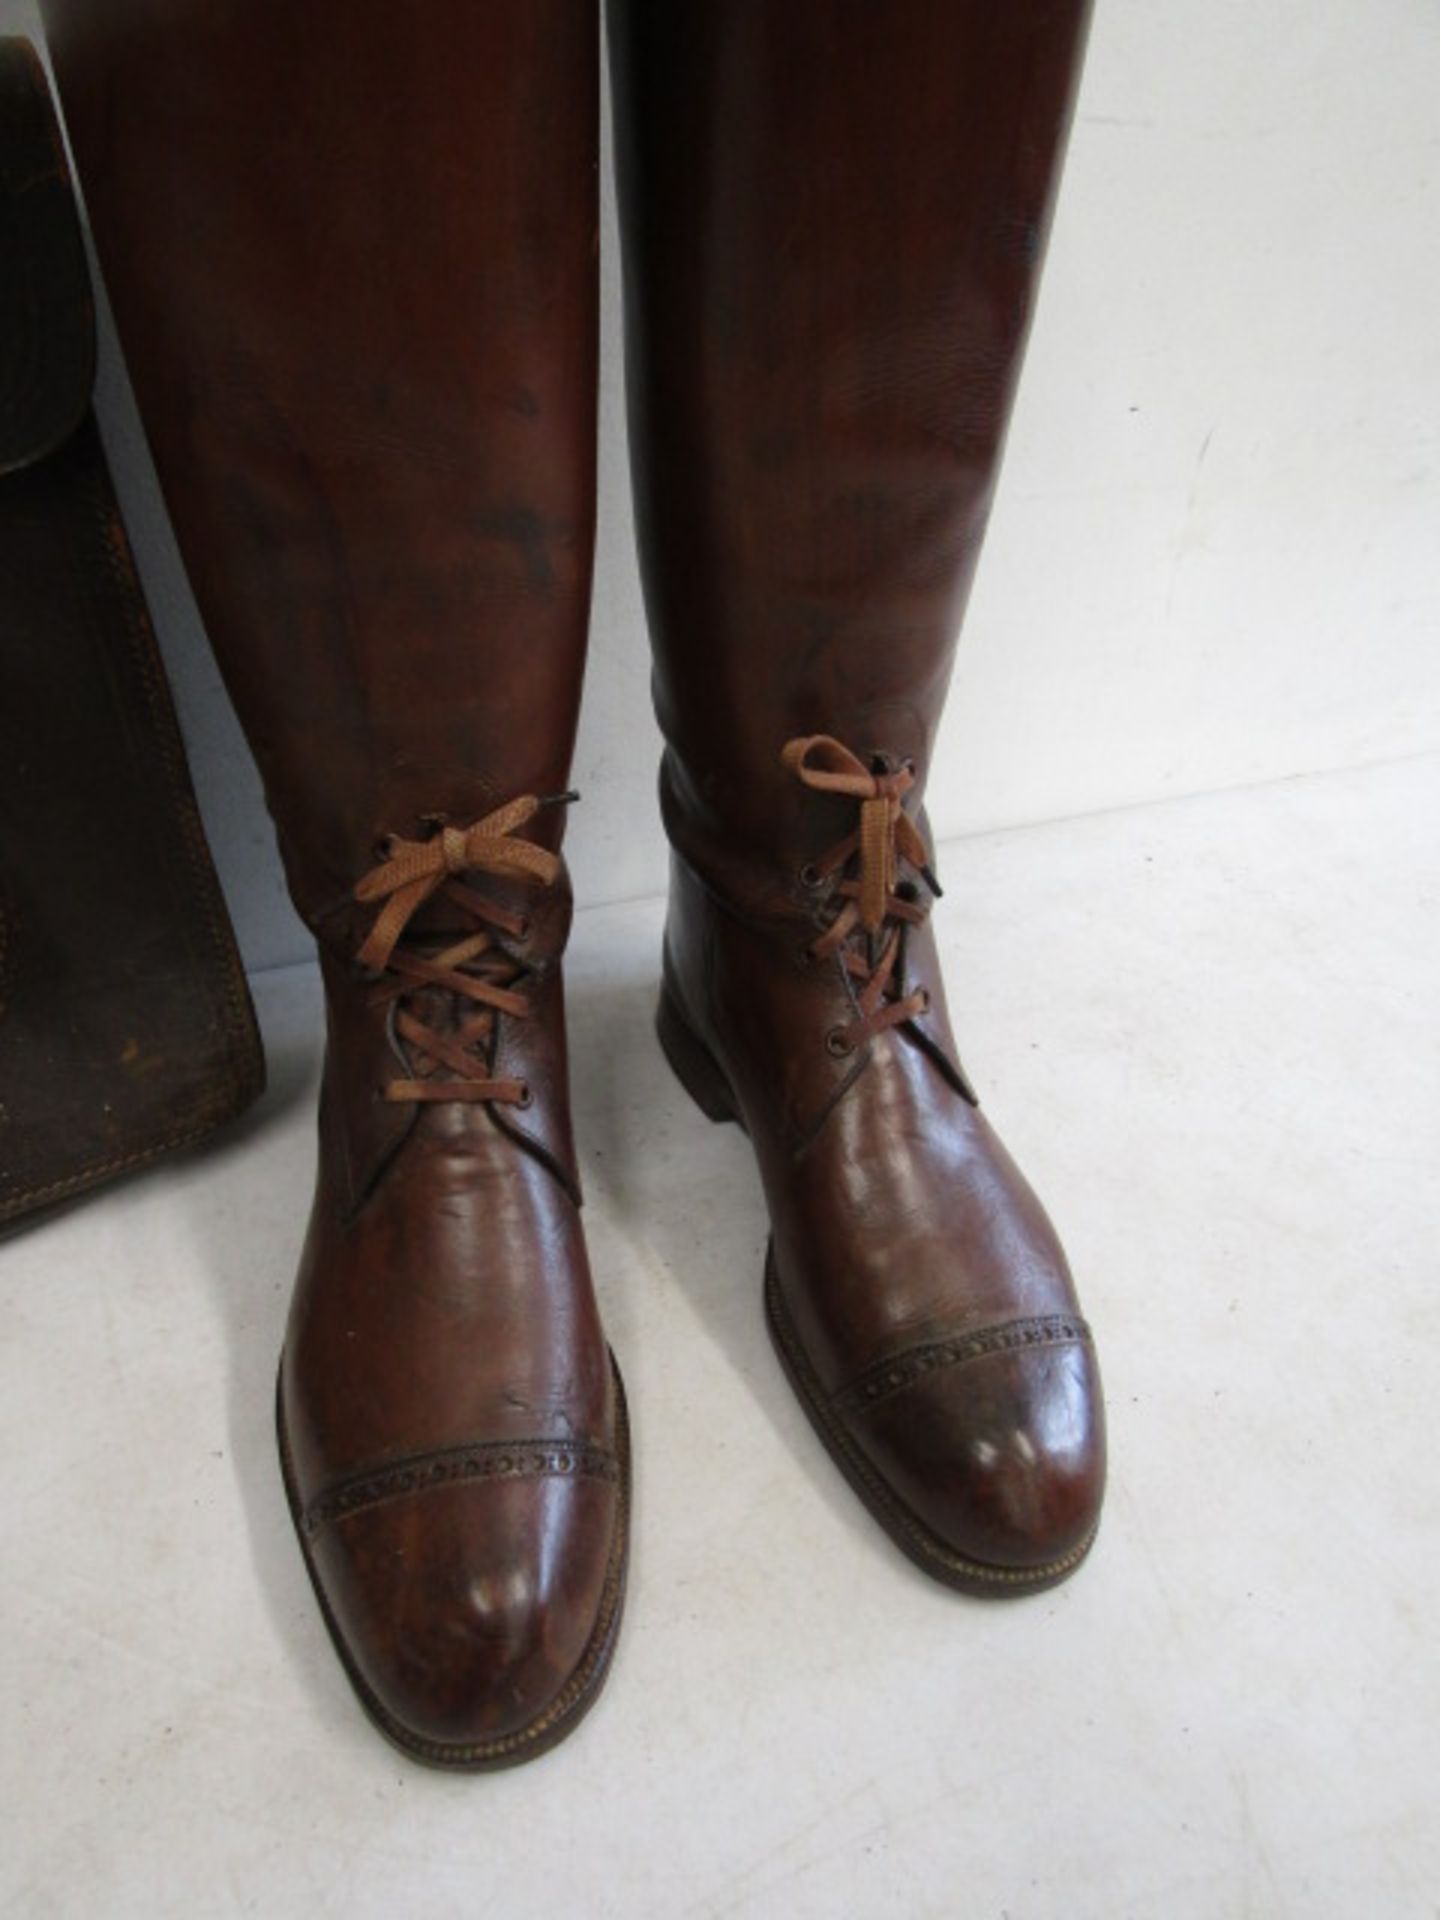 Military boots with wooden lasts and a leather bag - Image 2 of 4